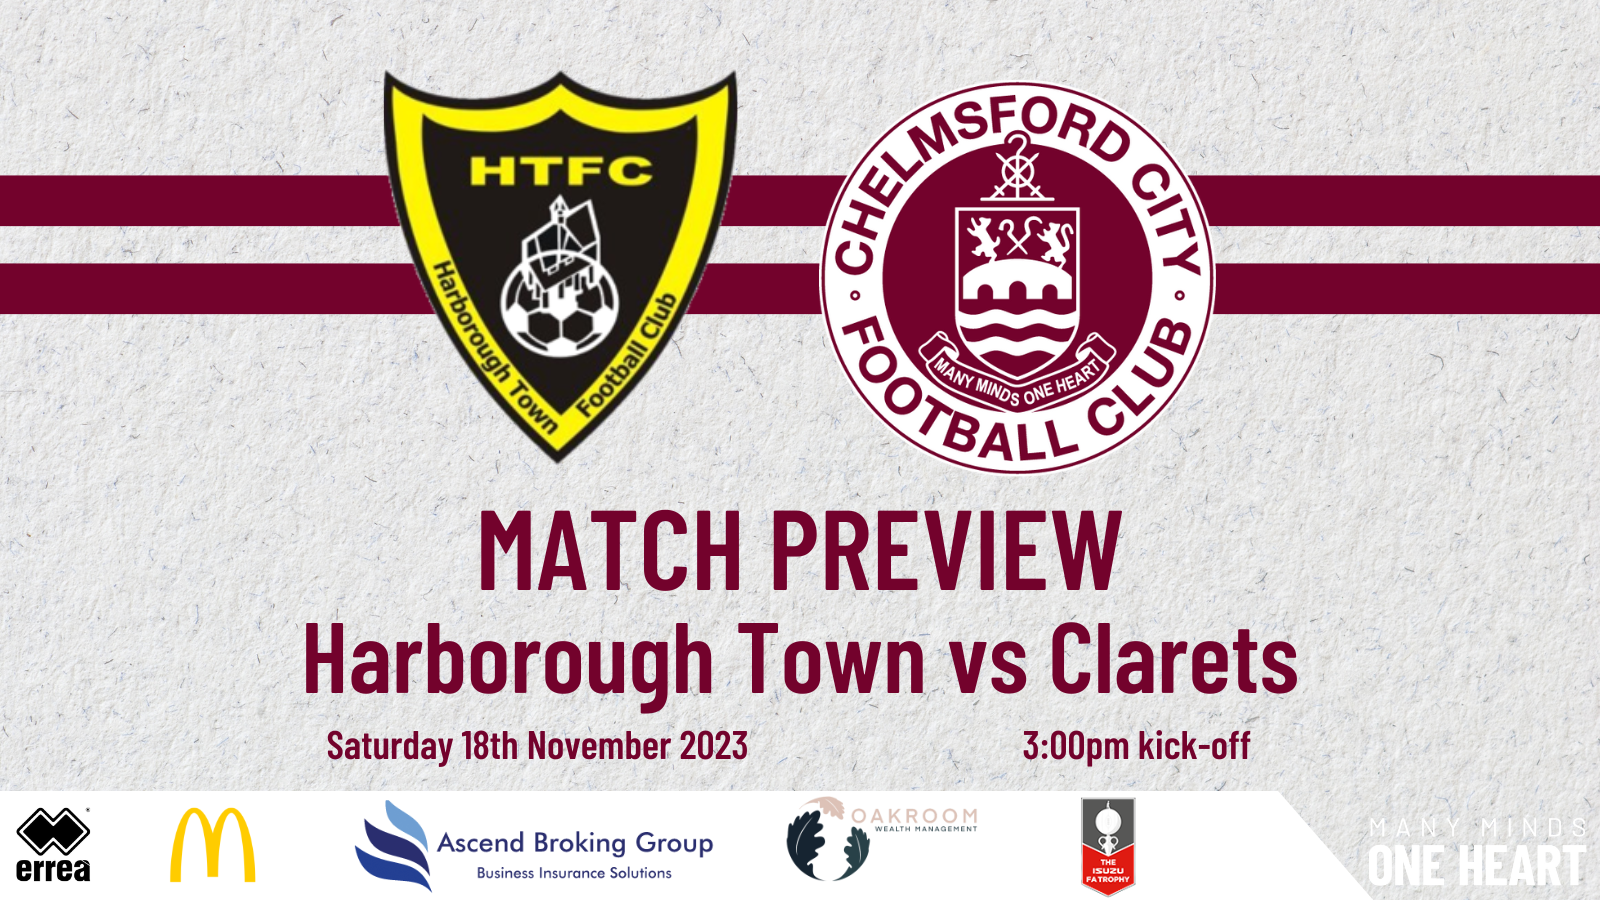 matchday preview